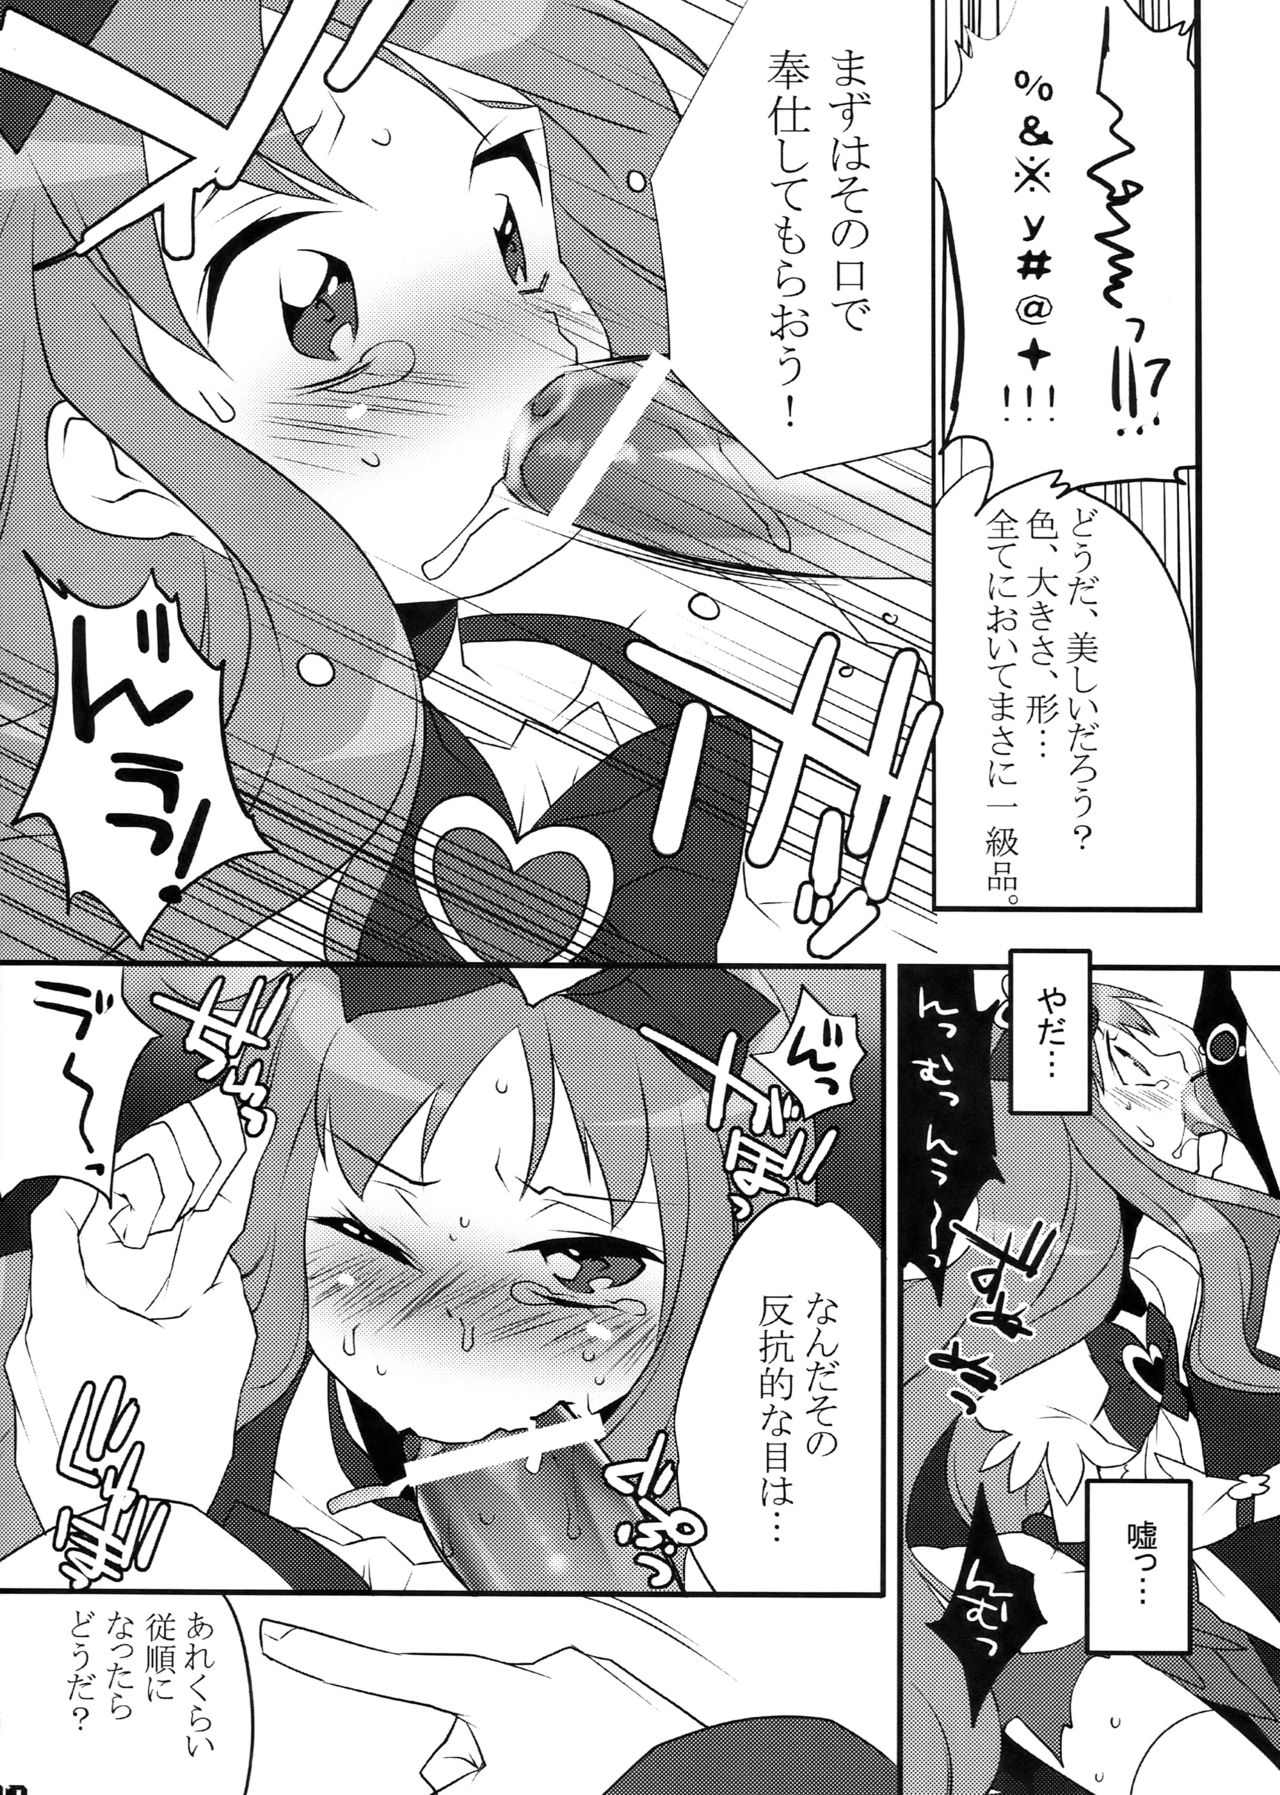 (COMIC1☆4) [Ash wing (Makuro)] Cure Heart (Heart Catch Precure!) (COMIC1☆4) (同人誌) [Ash wing (まくろ)] キュアハート (ハートキャッチプリキュア！)